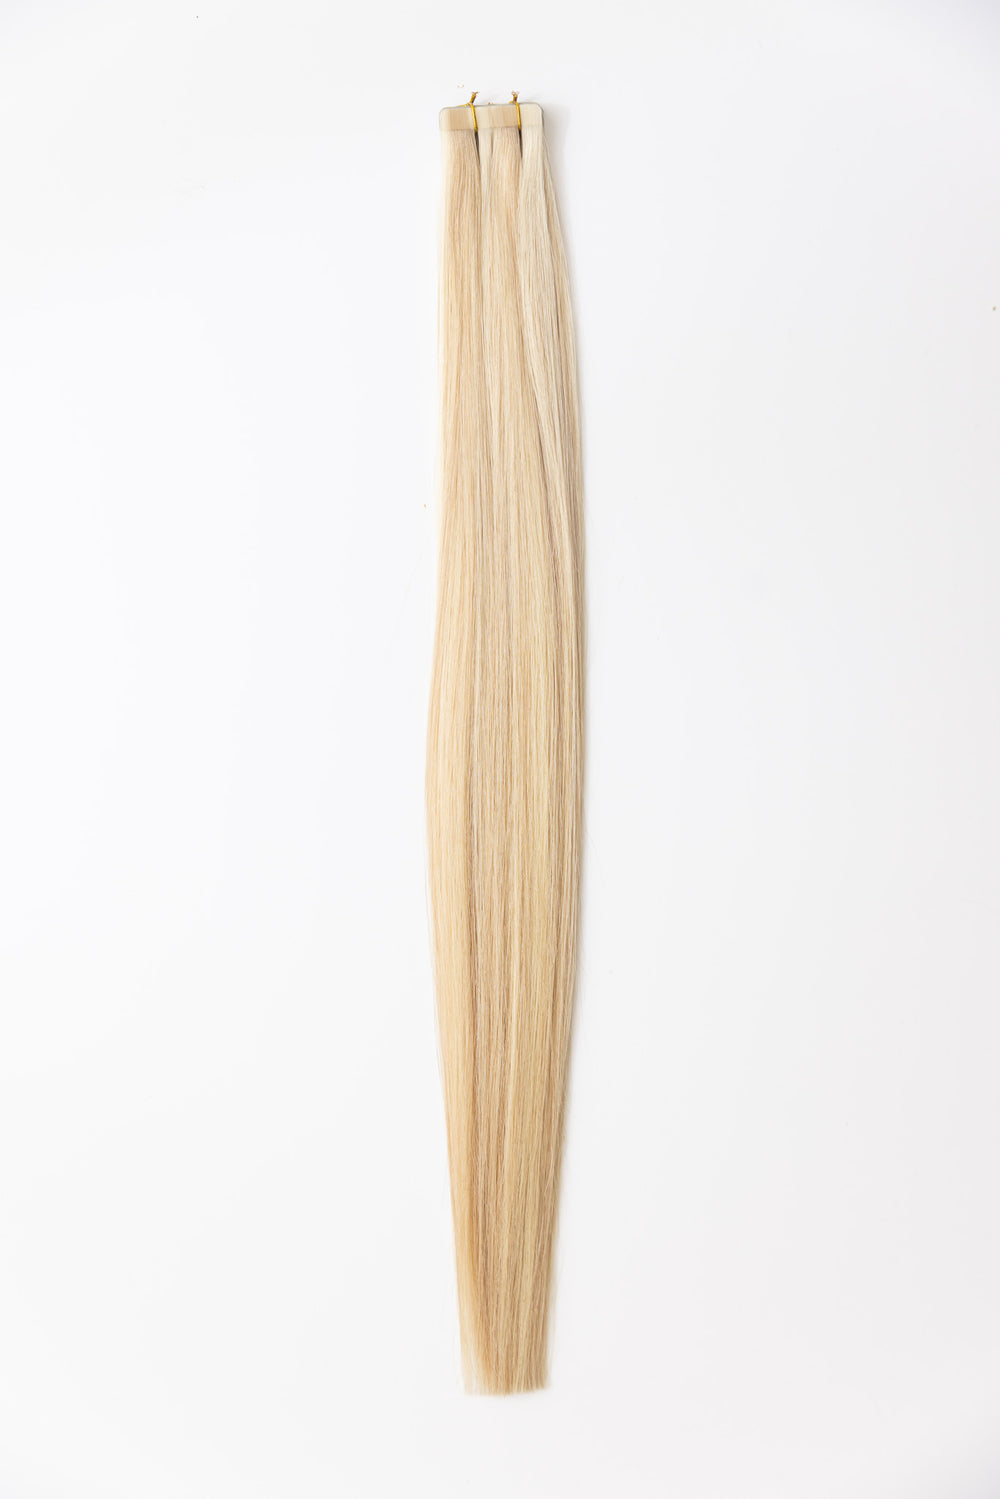 Beach Blonde Classic Tape Ins-Christian Michael Hair Extensions